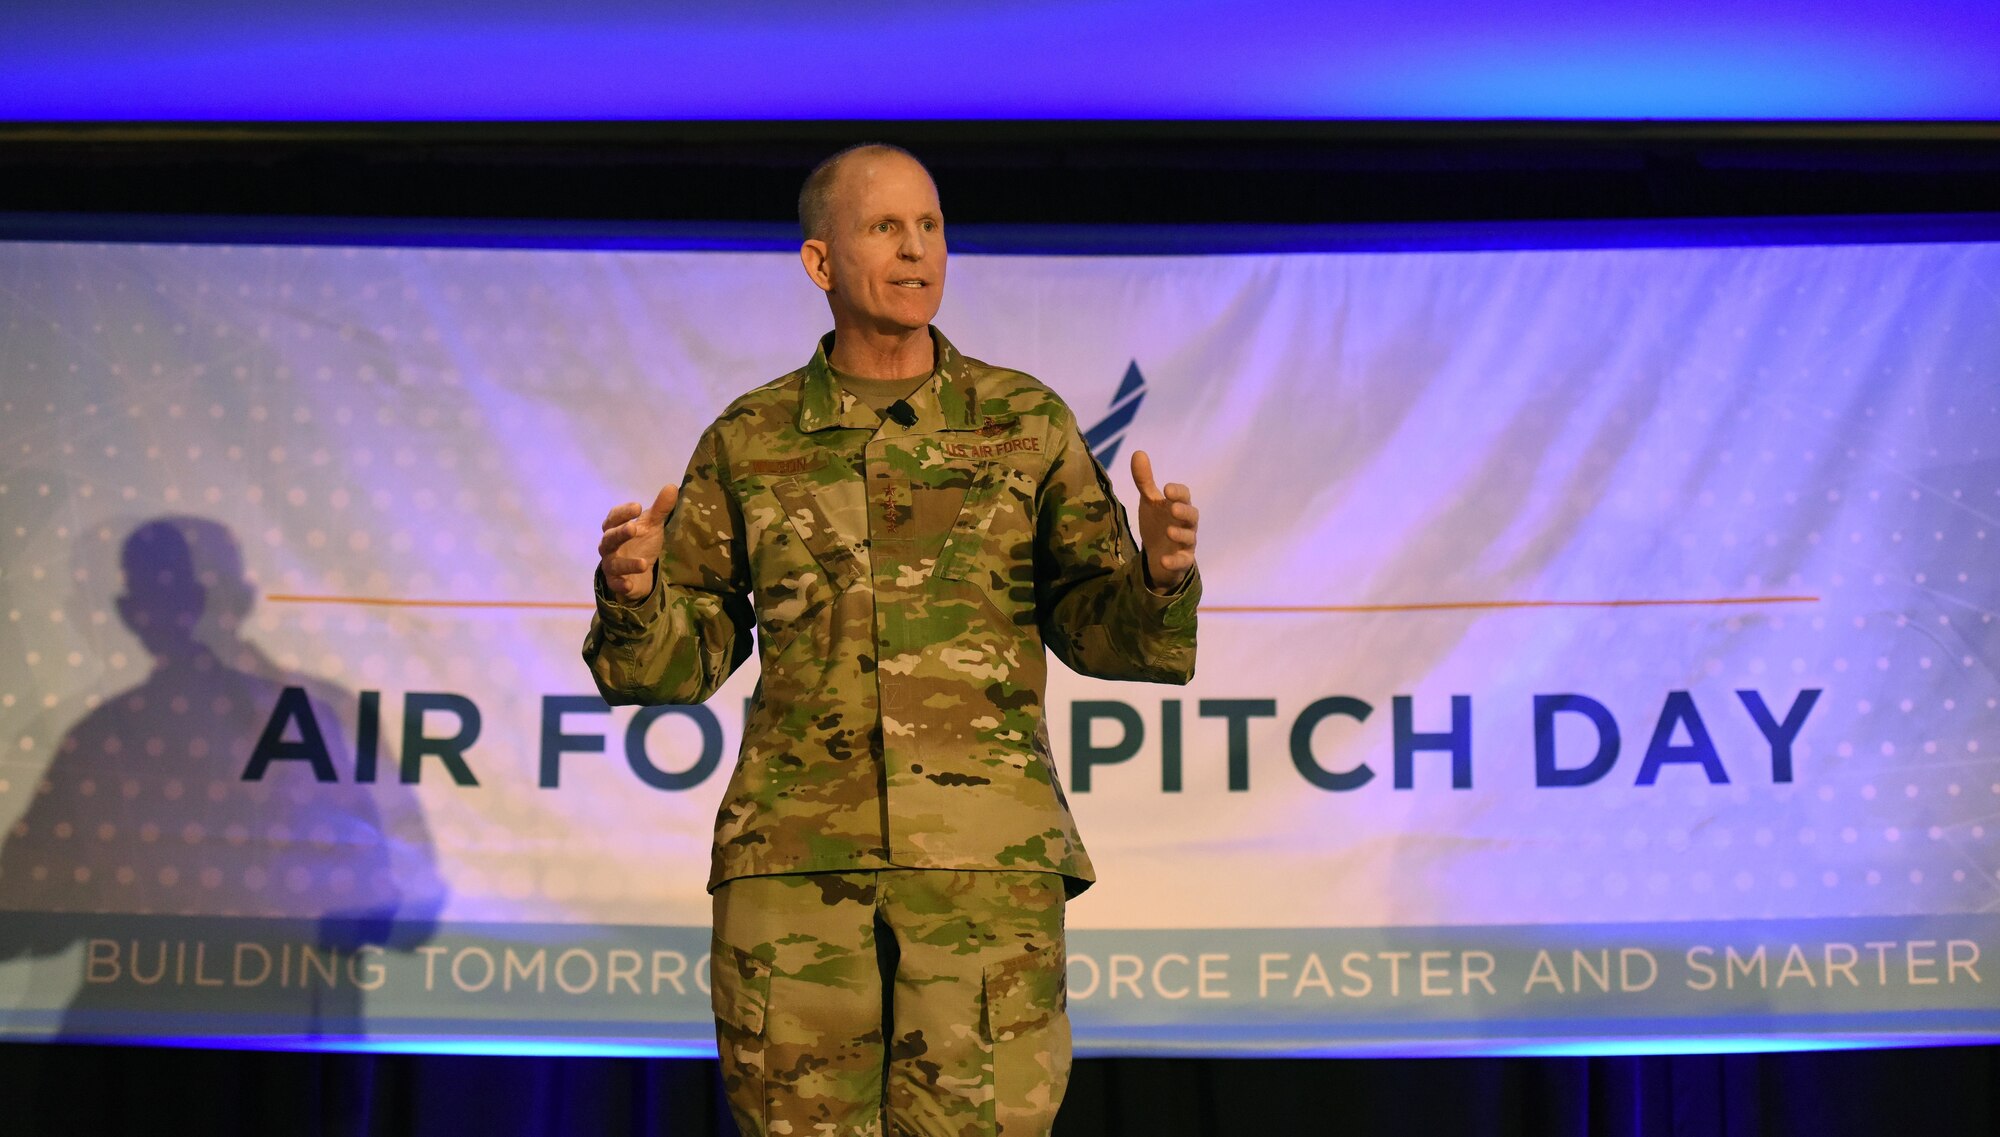 Air Force Vice Chief of Staff Gen. Stephen W. Wilson speaks to a crowd of small businesses, venture capitalists and Airmen during the inaugural Air Force Pitch Day inNew York, March 7, 2019. Air Force Pitch Day is designed as a fast-track program to put companies on one-page contracts and same-day awards with the swipe of a government credit card. The Air Force is partnering with small businesses to help further national security in air, space and cyberspace. (U.S. Air Force photo by Tech Sgt. Anthony Nelson Jr.)